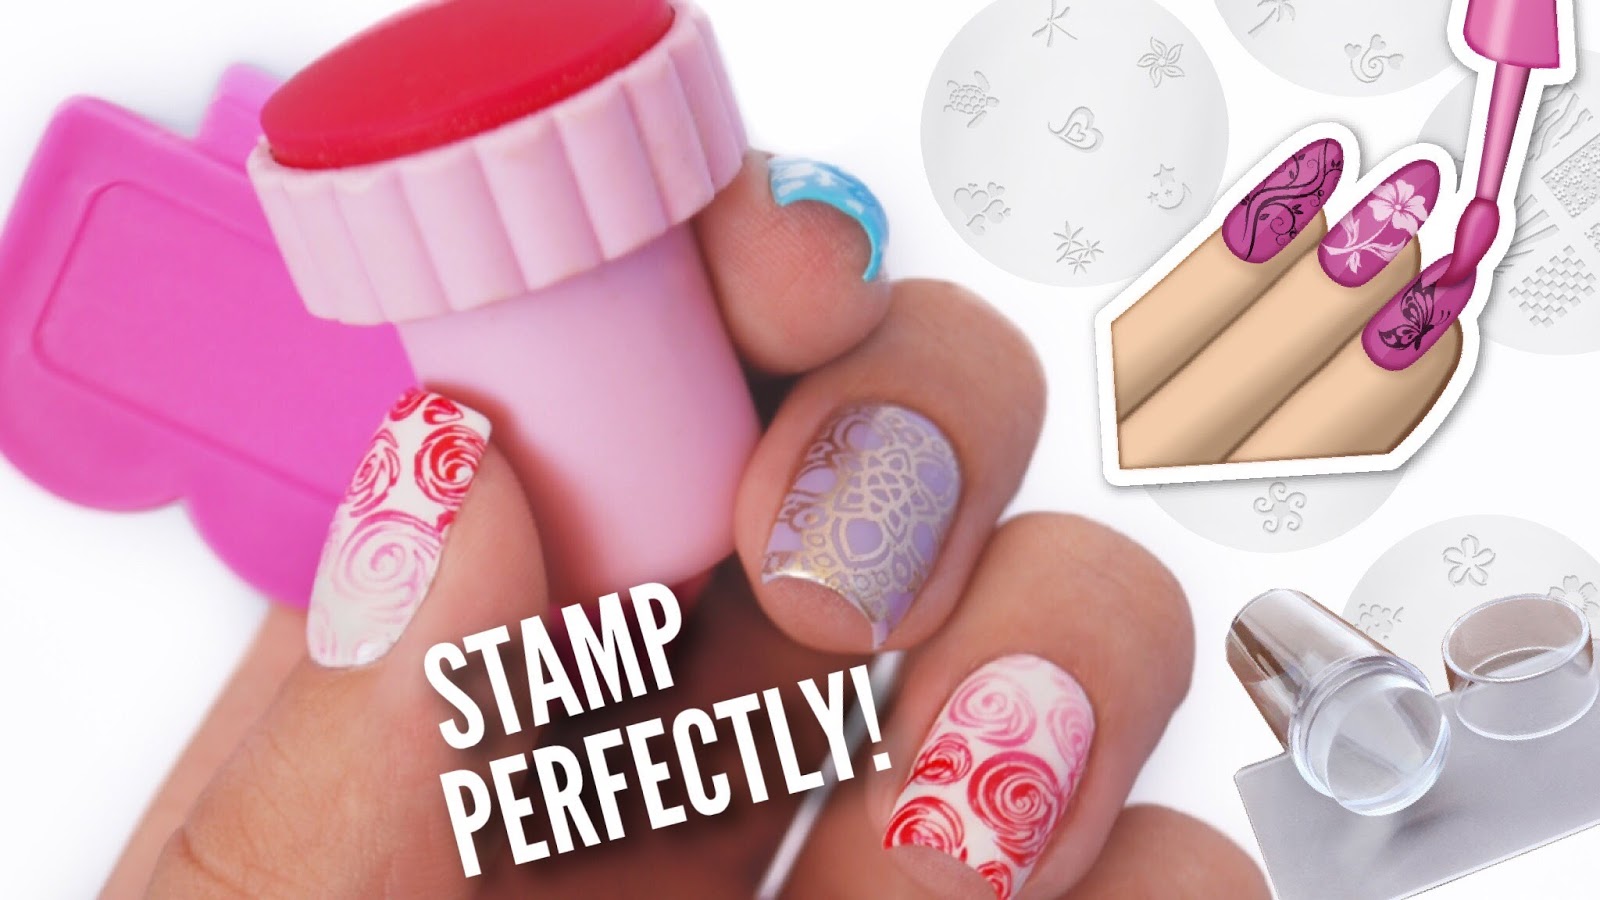 Stamping Nail Art Plates - wide 6